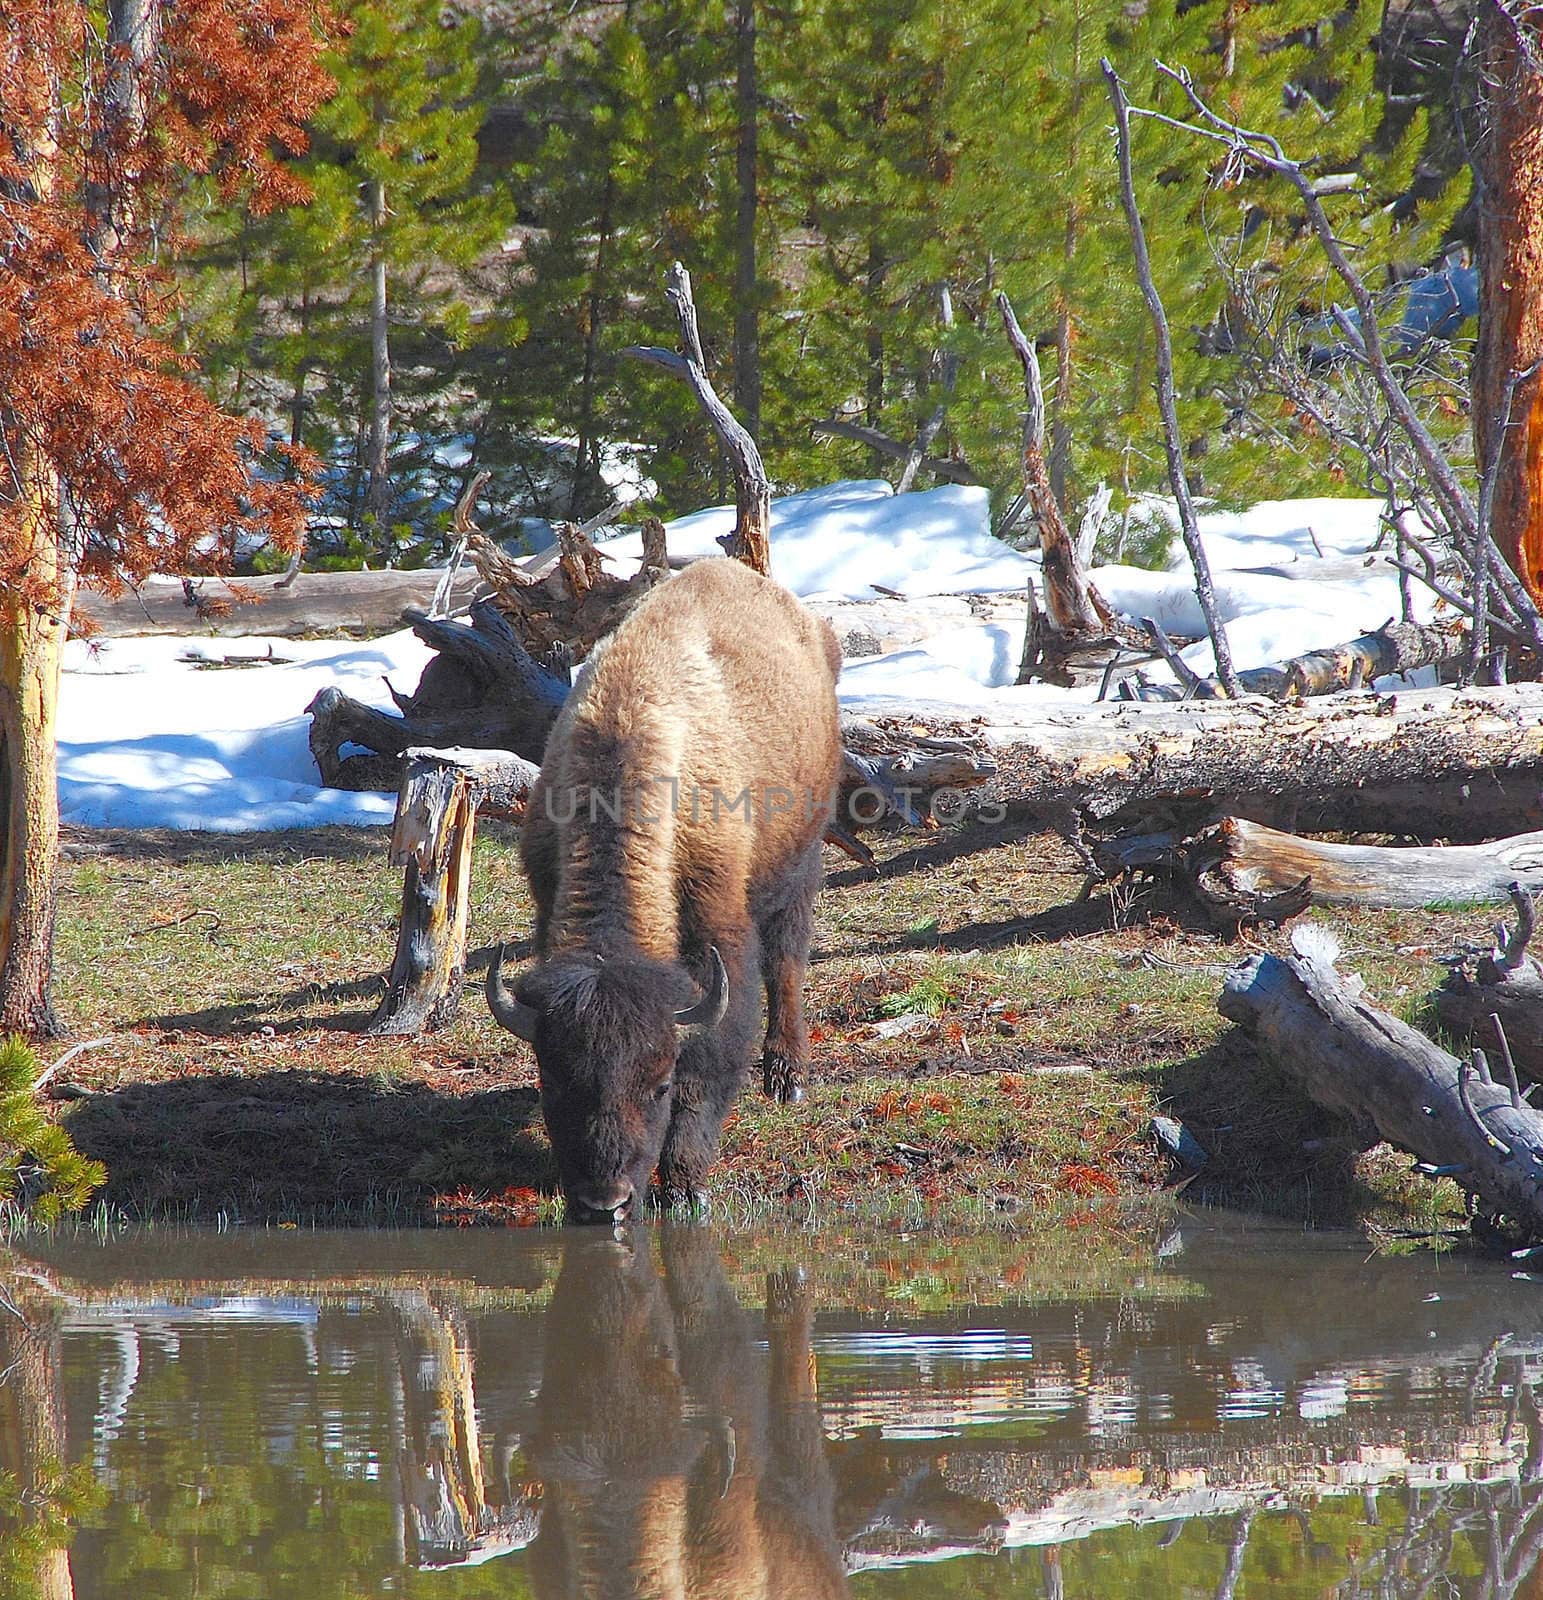 Buffalo in the wilderness at a pond